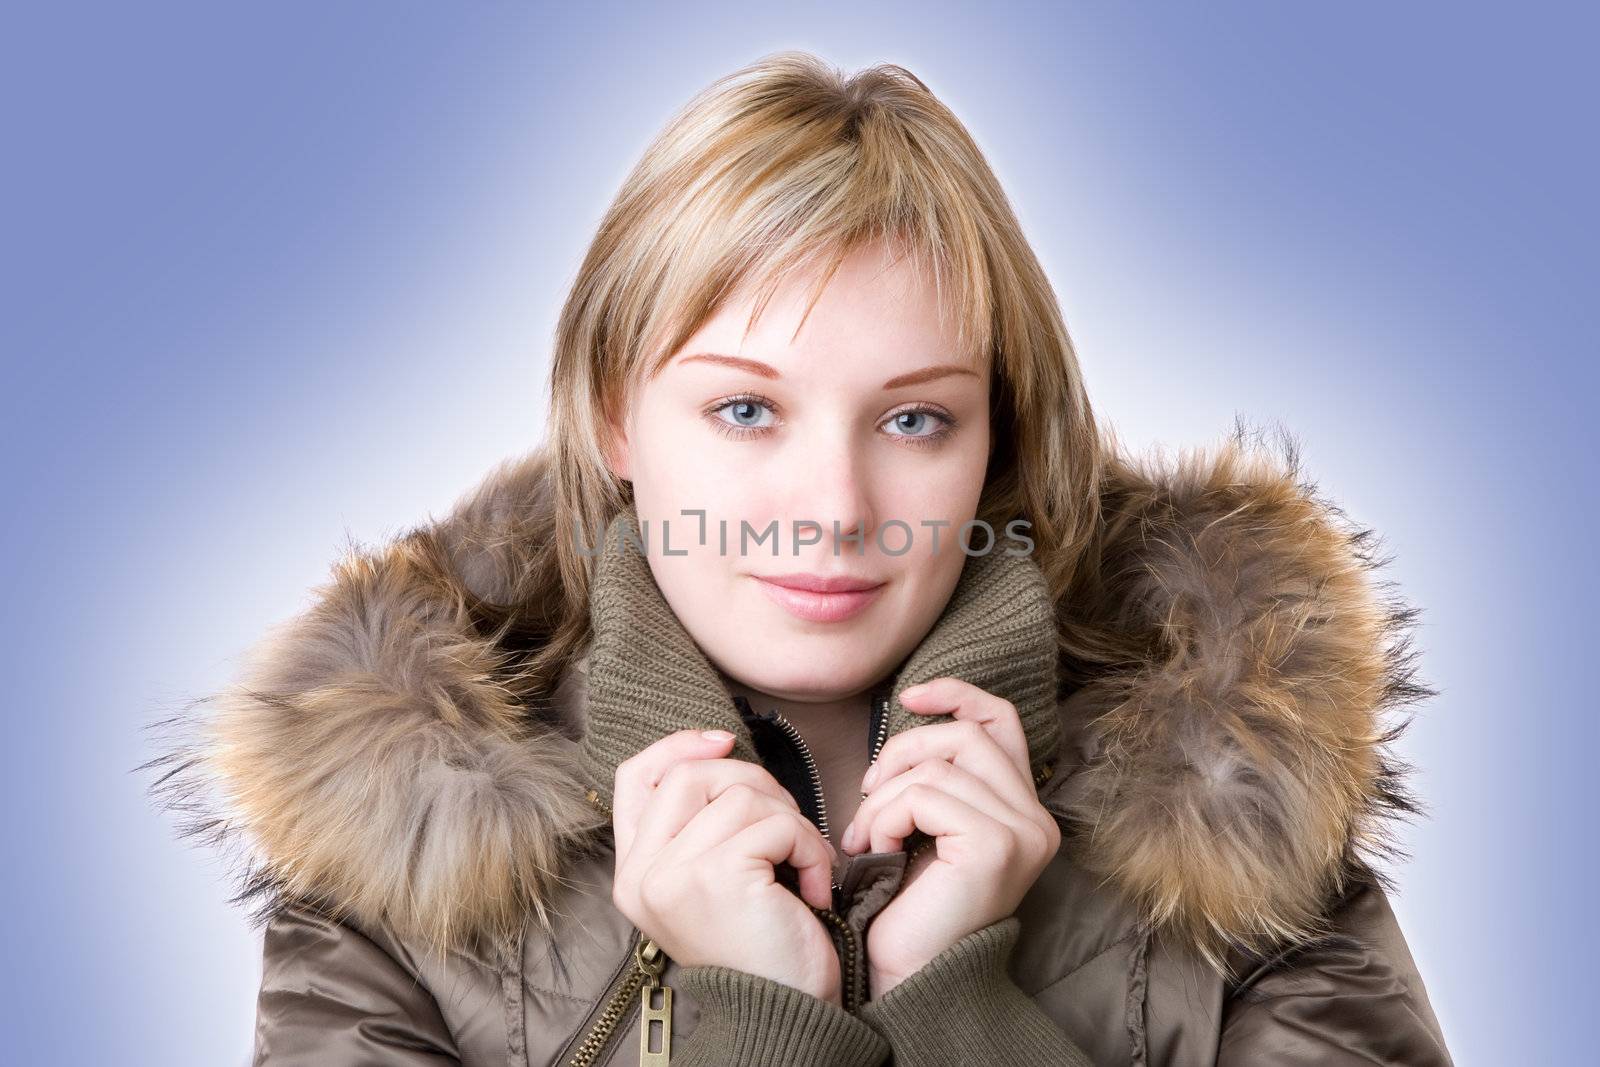 young girl in a jacket with a fur collar on a light blue background